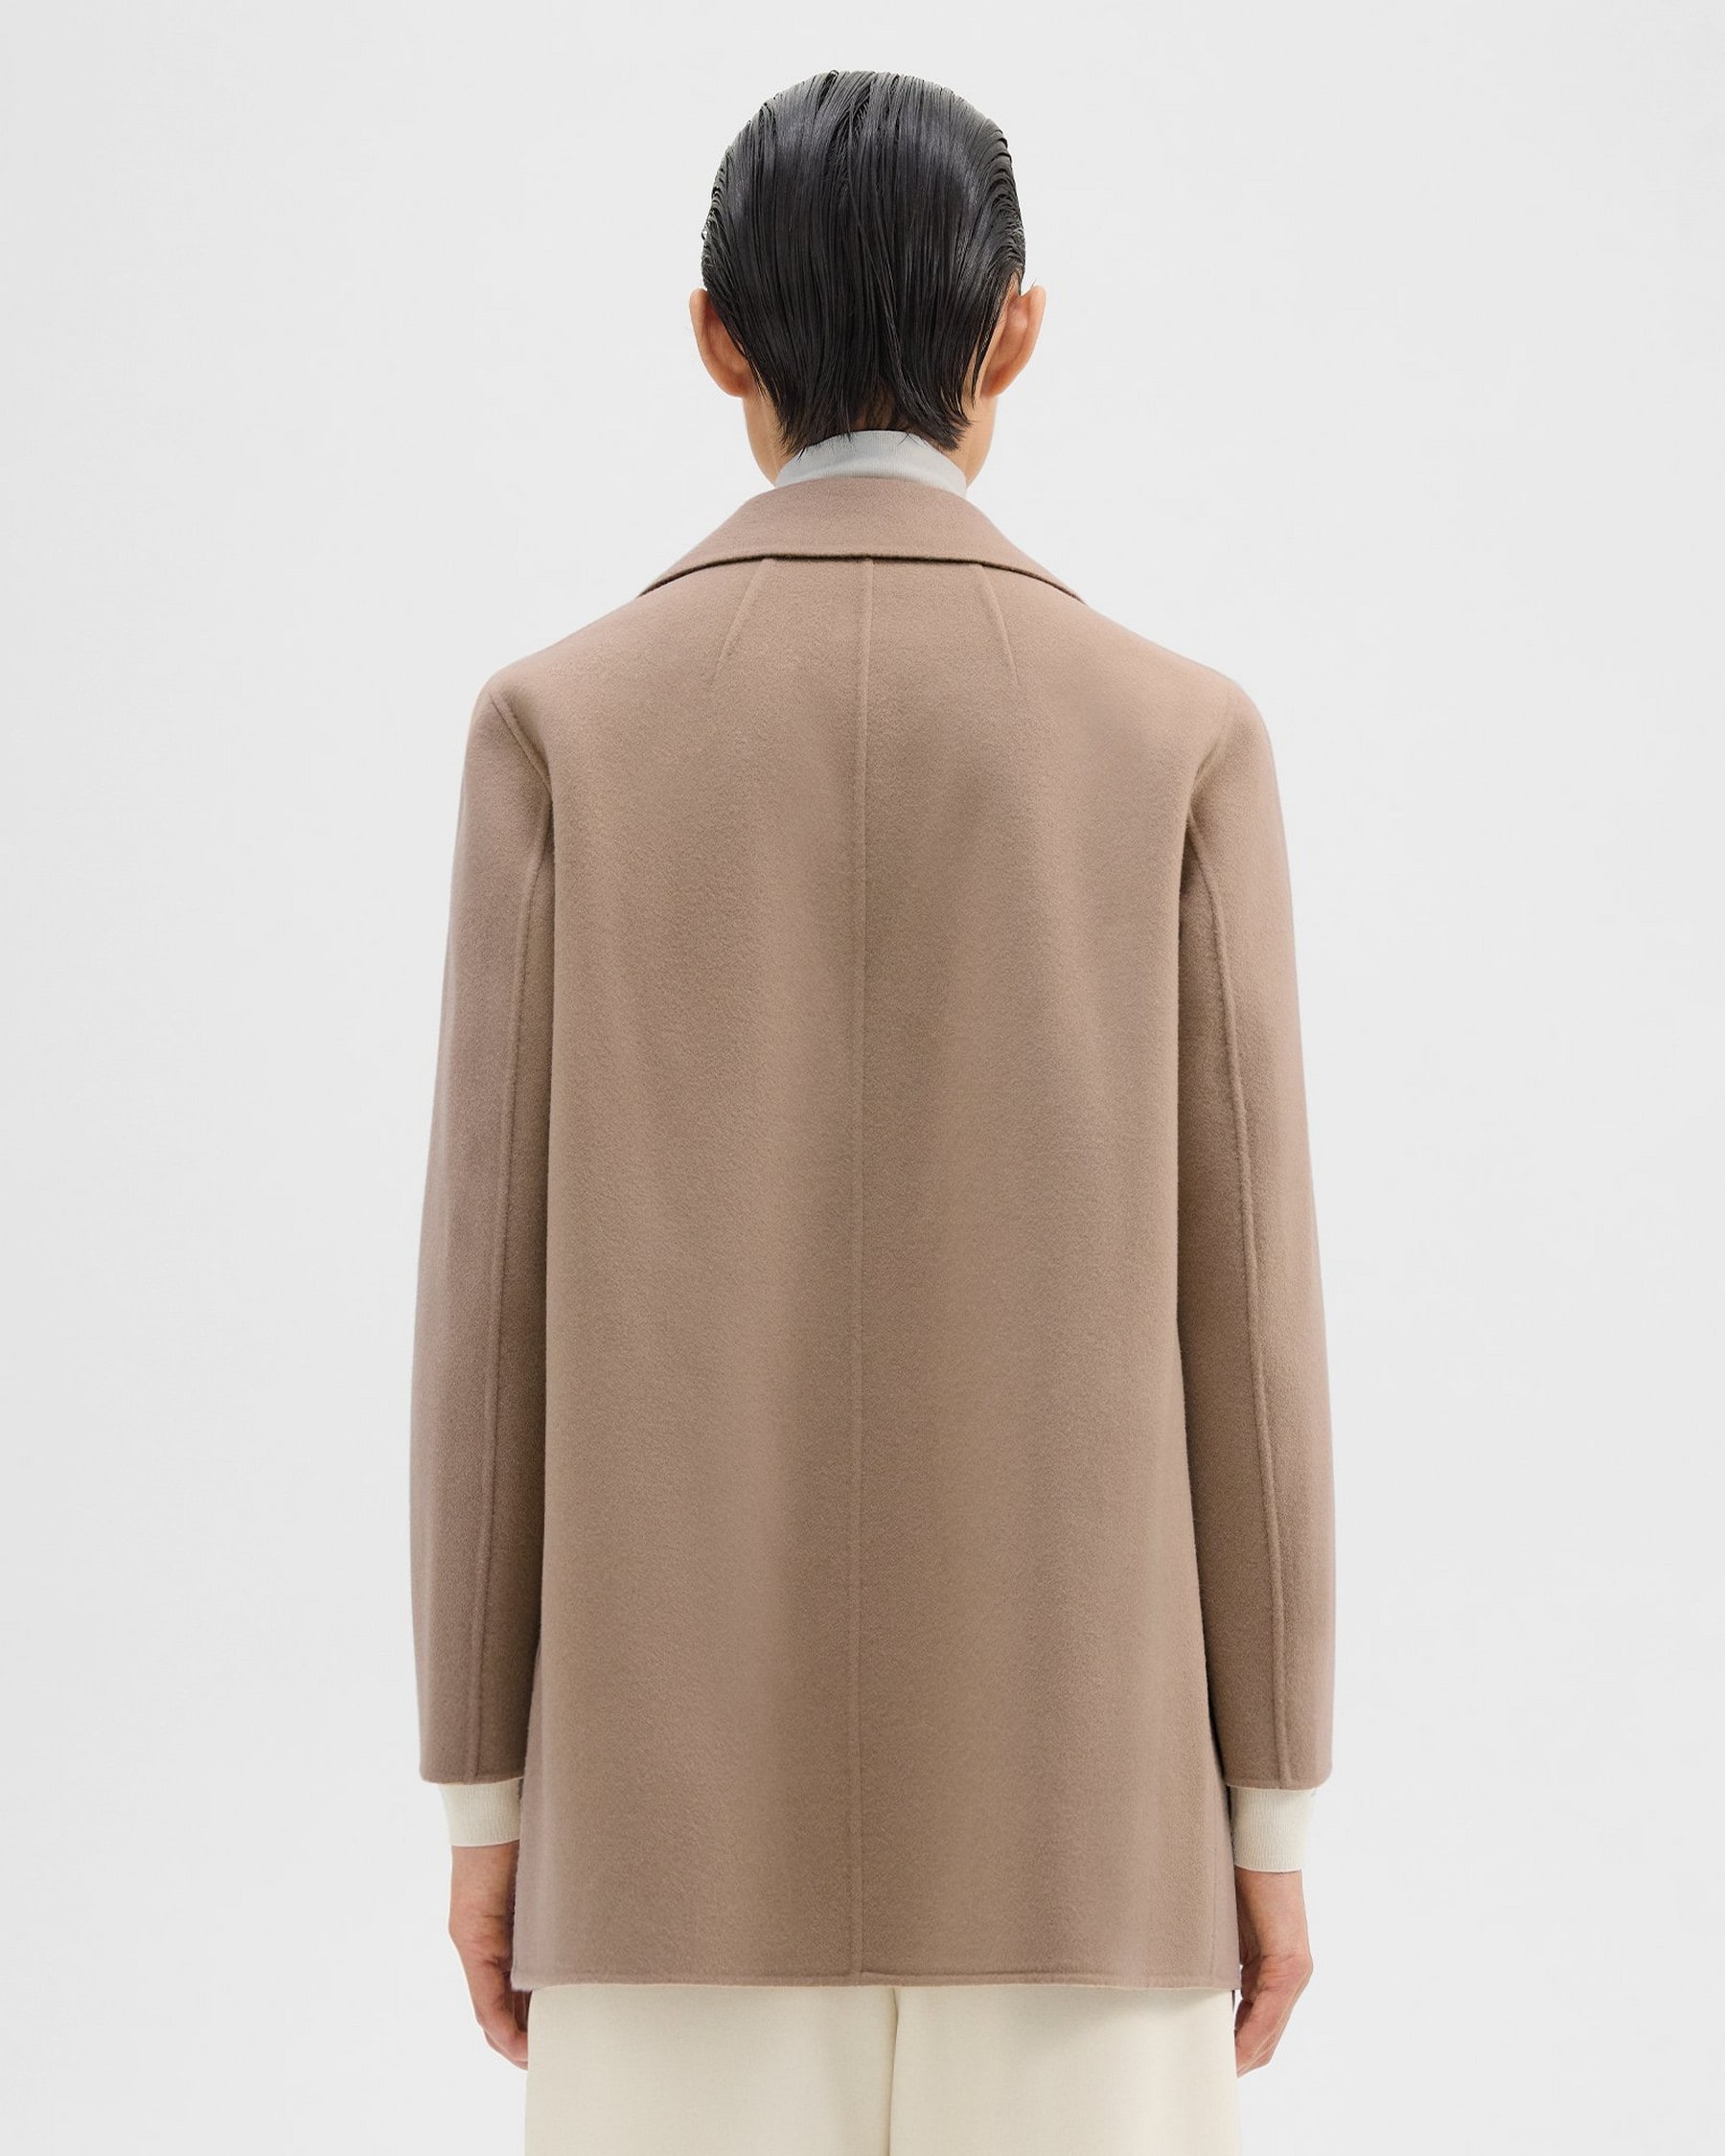 Clairene Jacket in Double-Face Wool-Cashmere